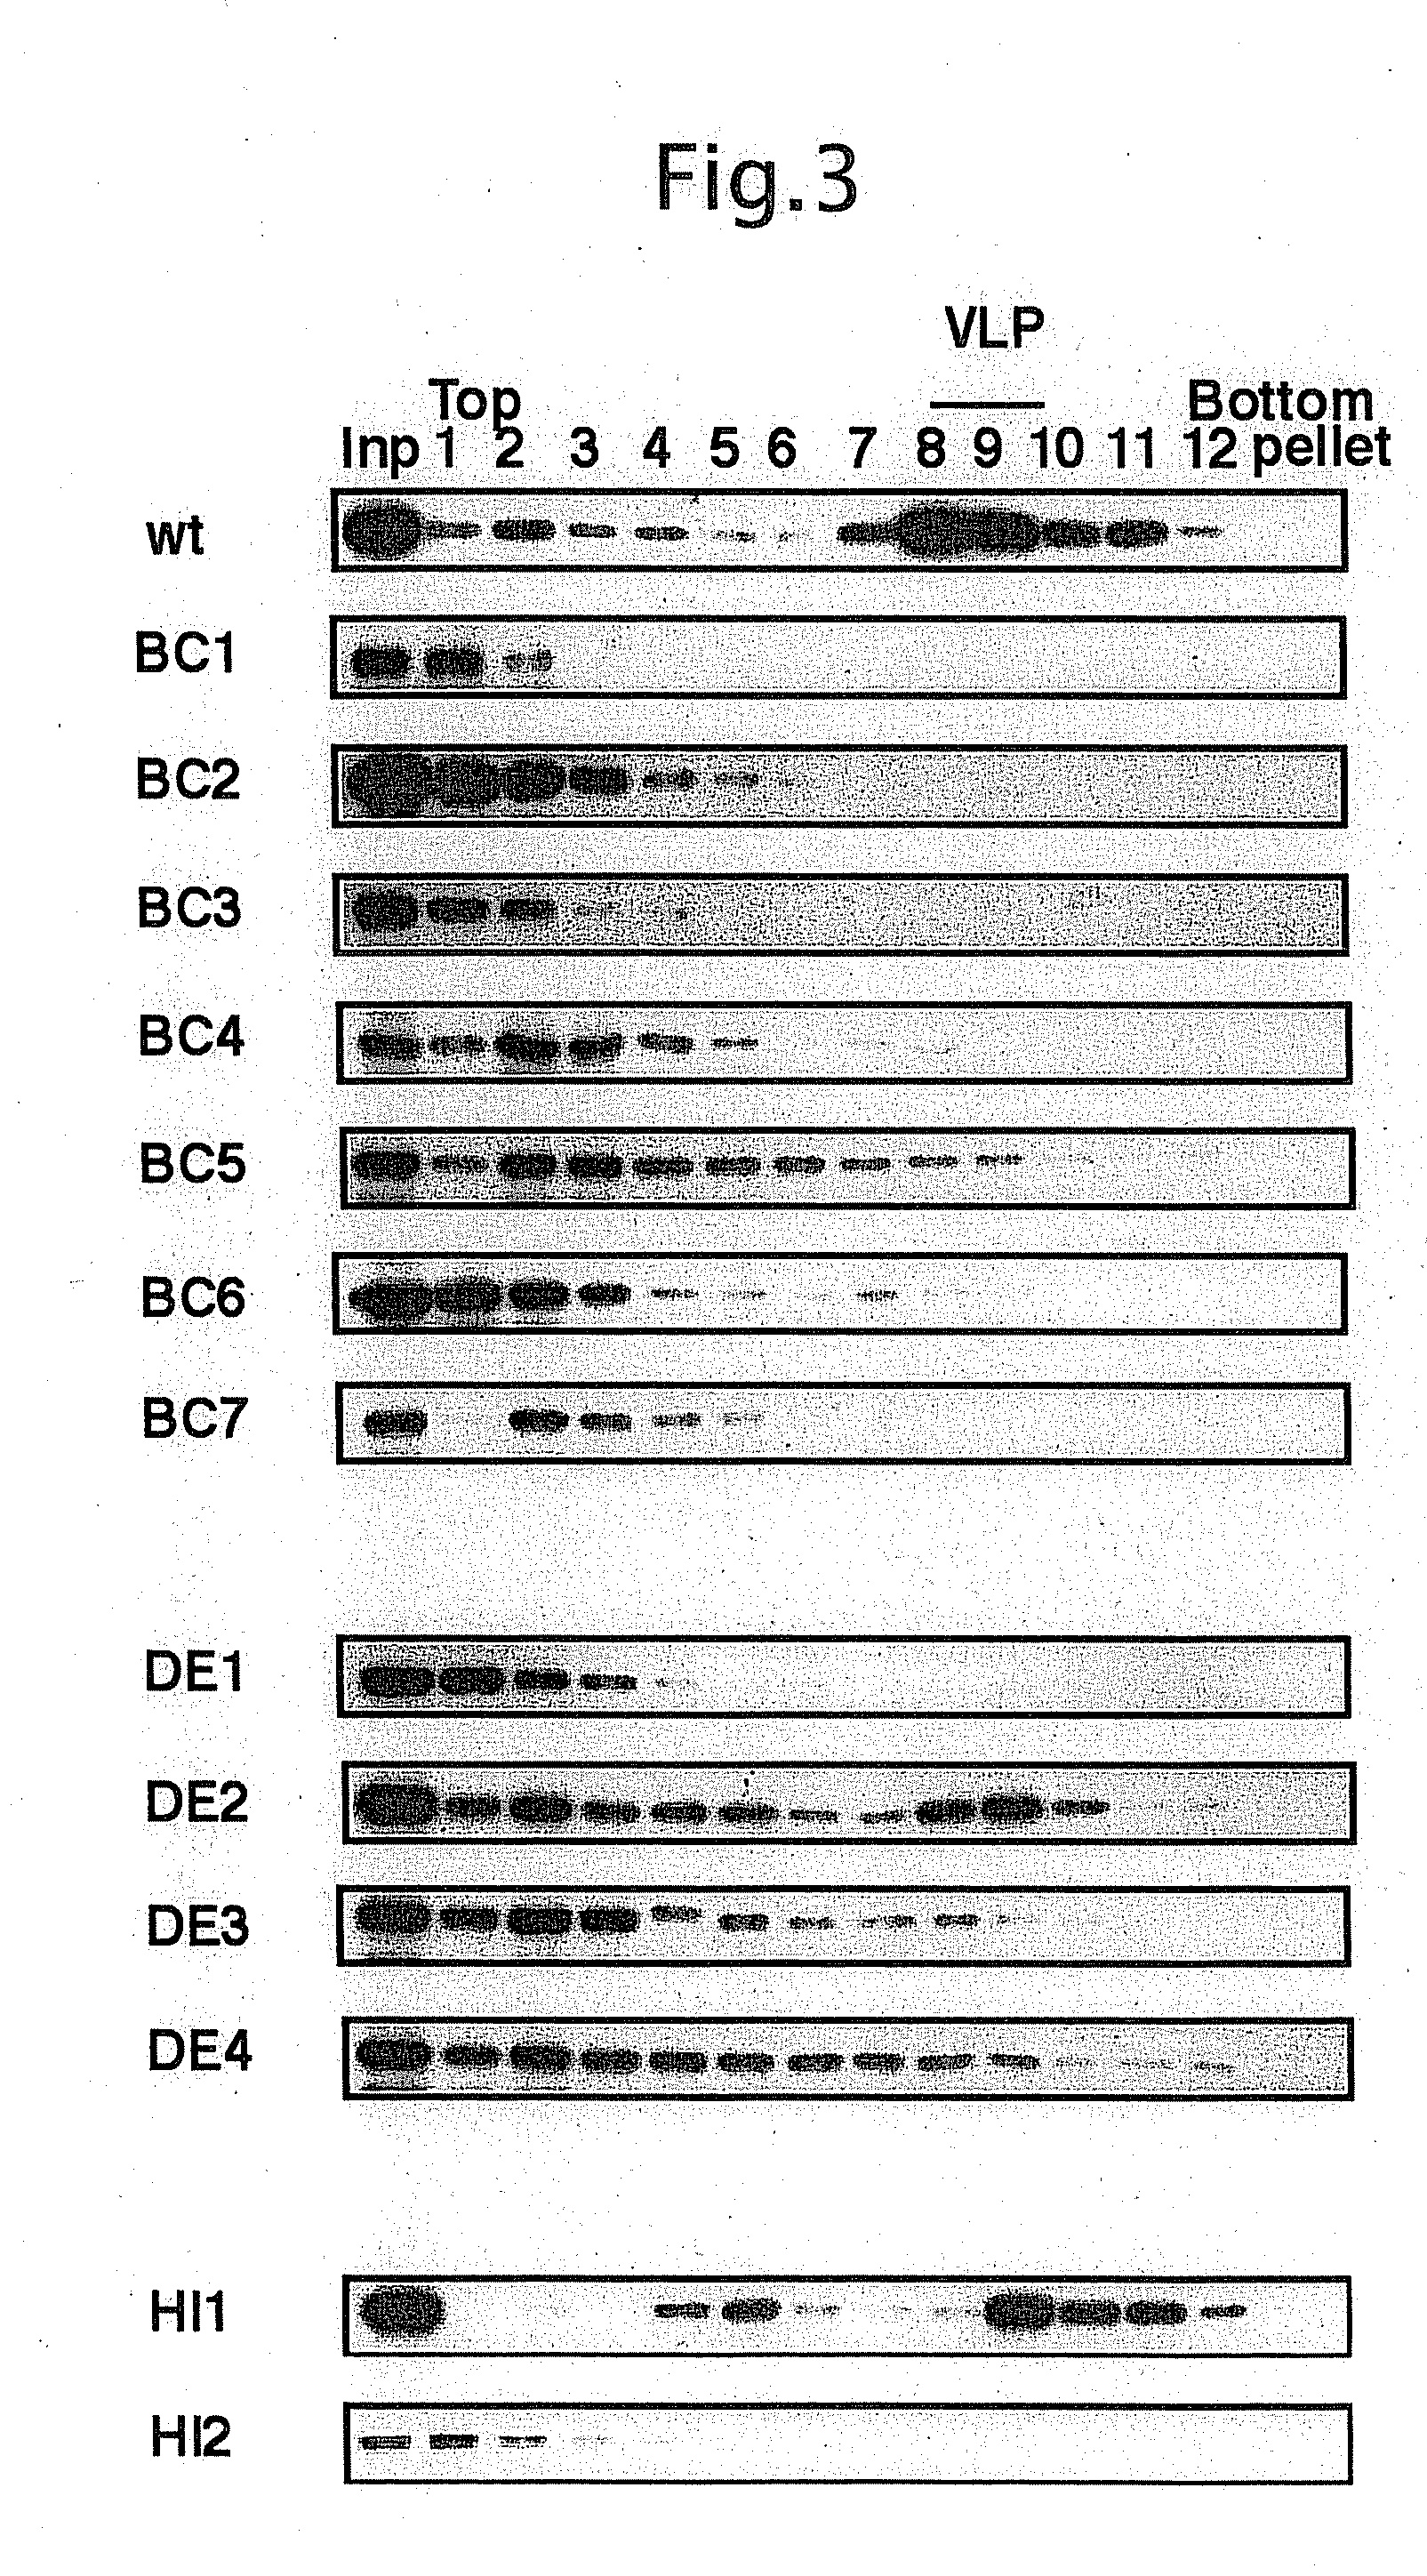 Altered virus capsid protein and use thereof